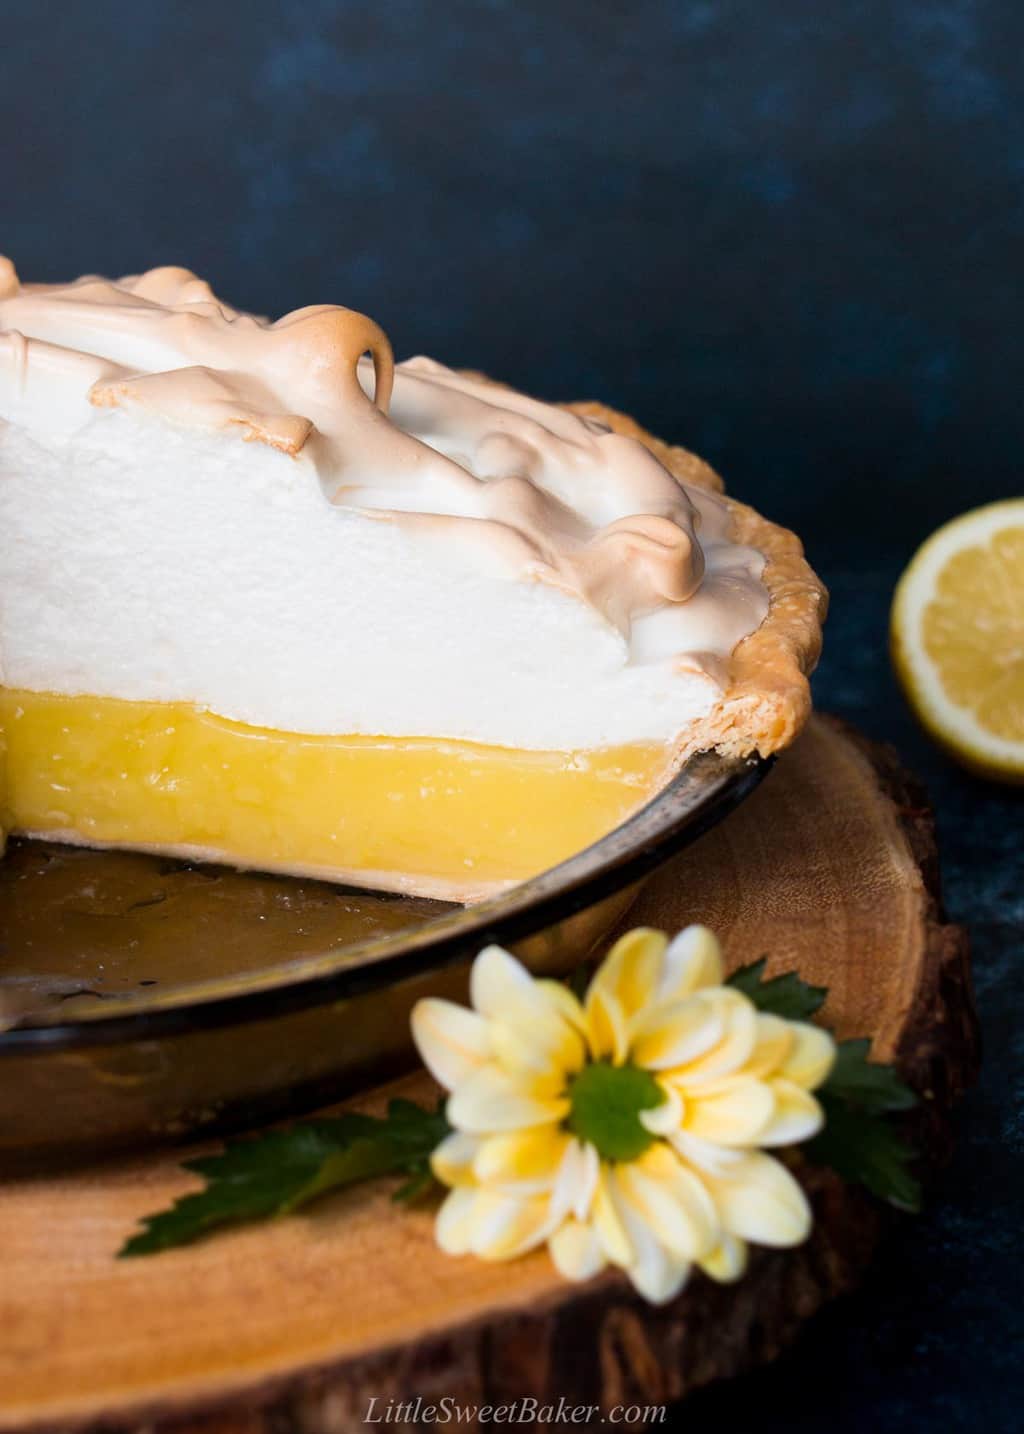 A cross section of a homemade lemon meringue pie on a wooden board.